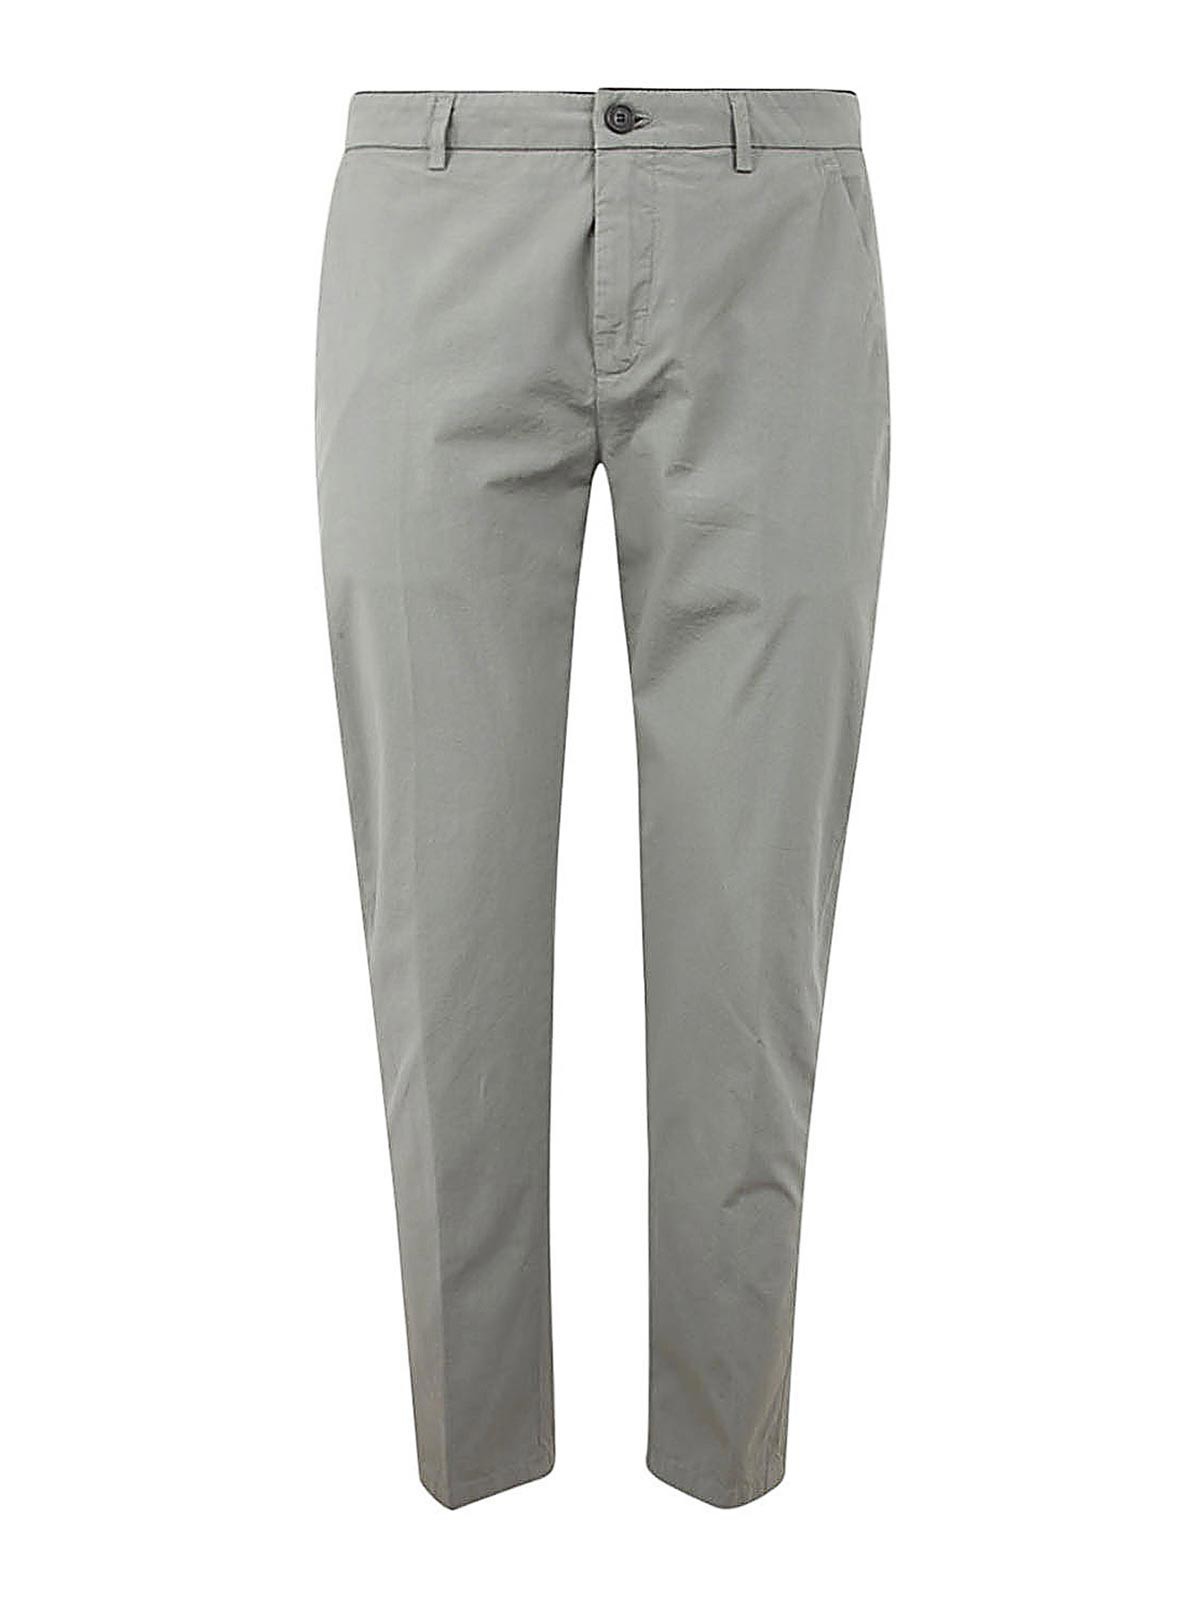 DEPARTMENT 5 CHINO TROUSERS